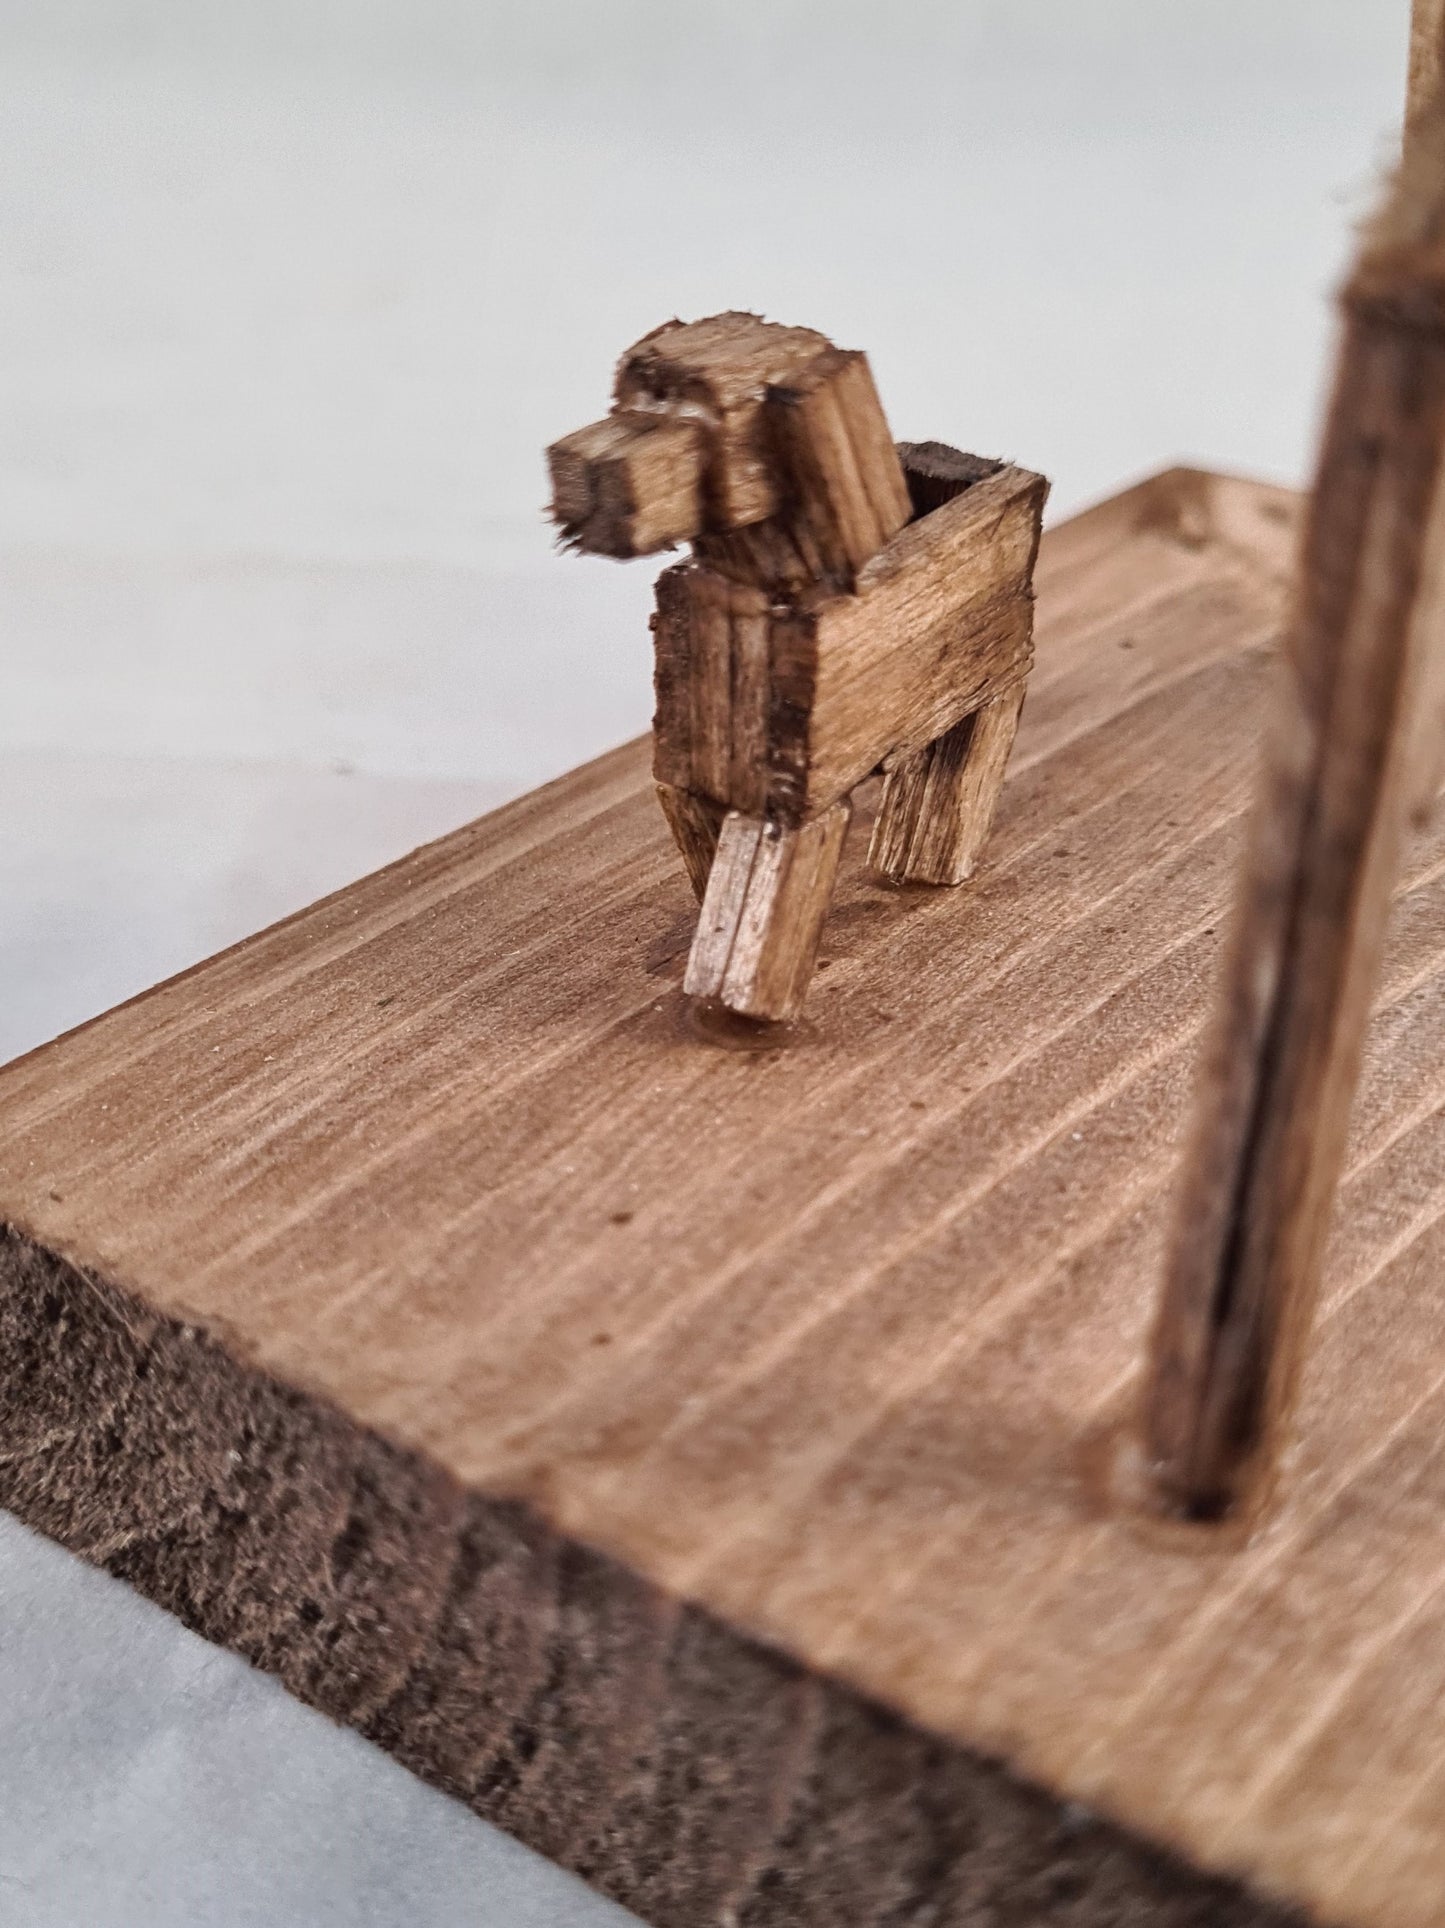 Running With Doggo - Handcrafted Wooden Matchstick Figures - Gifts, Ornaments and Decor By Tiggidy Designs